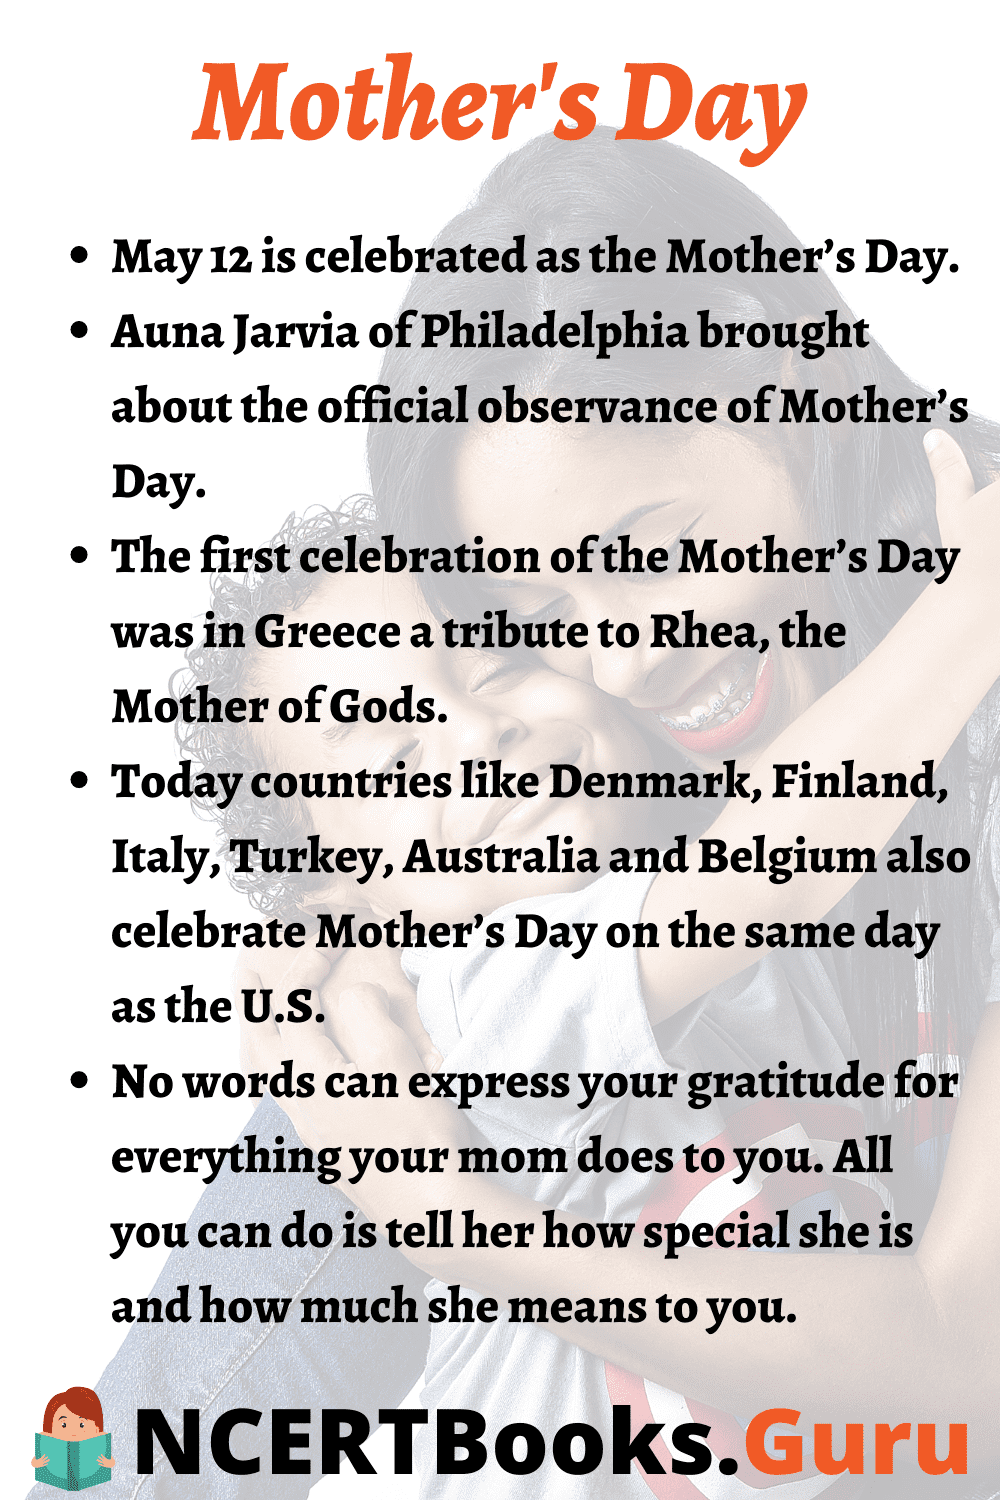 importance of mother in our life essay